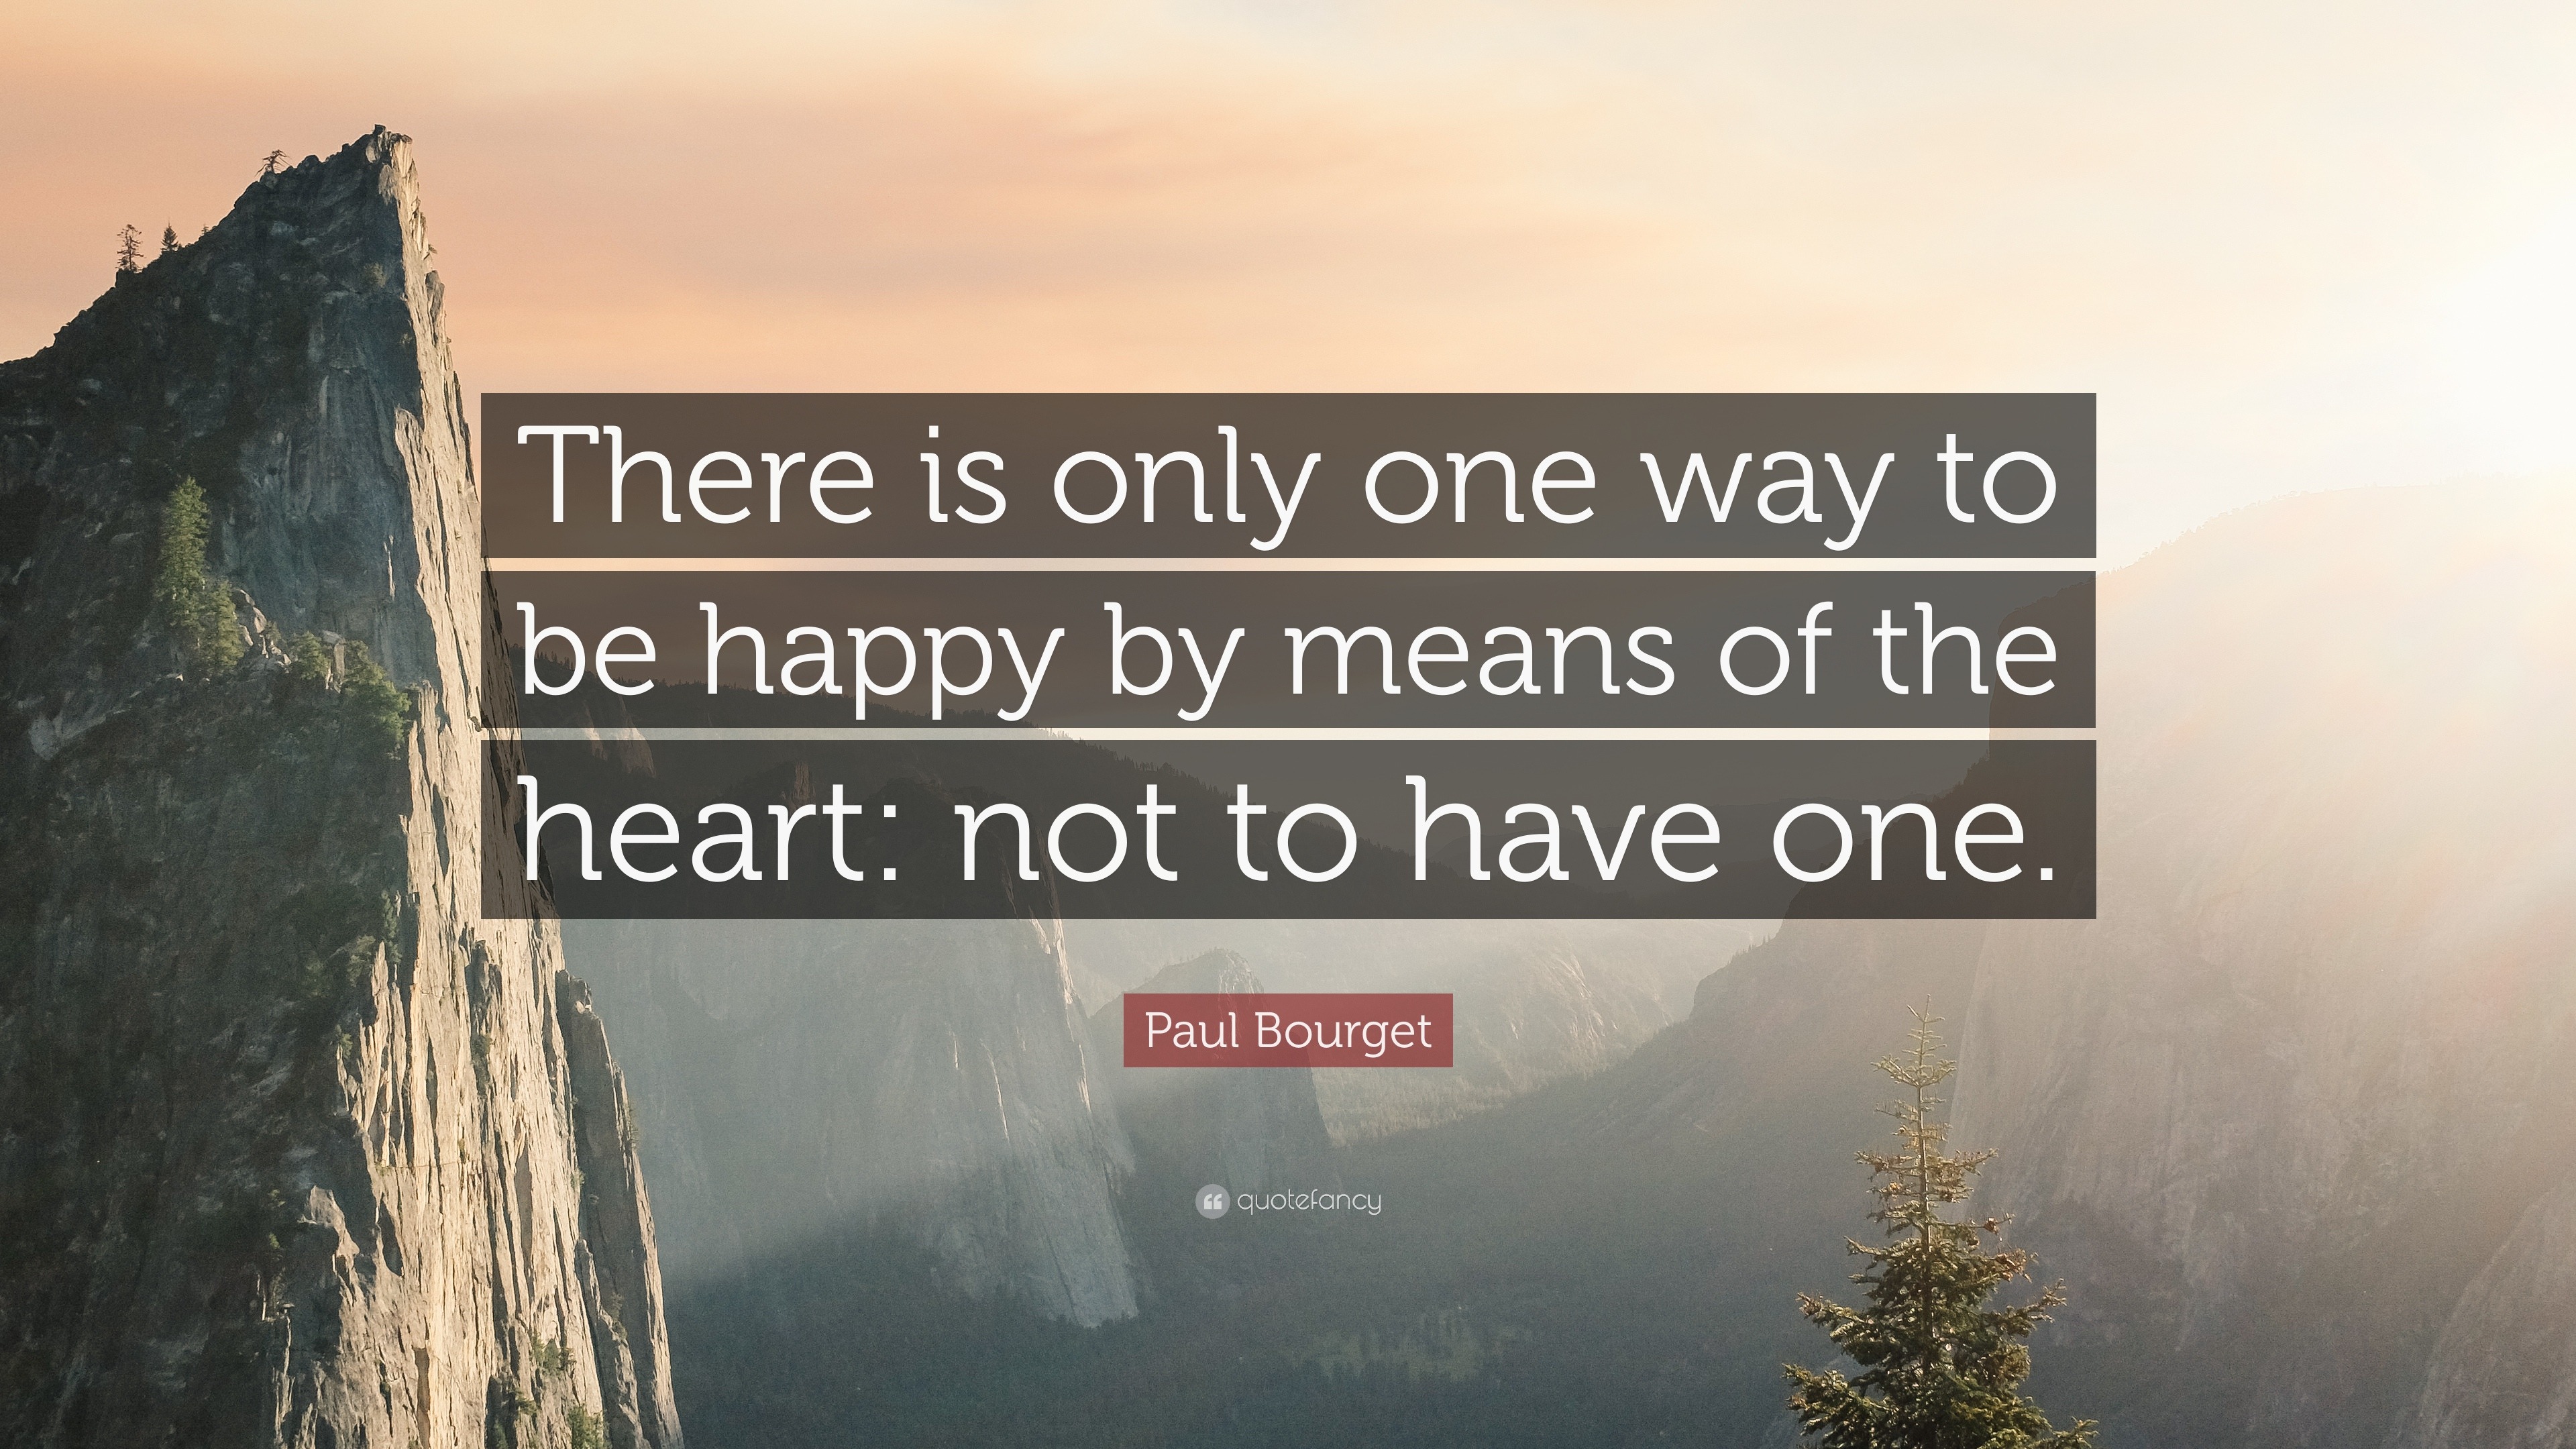 Paul Bourget Quote: “There is only one way to be happy by means of the ...